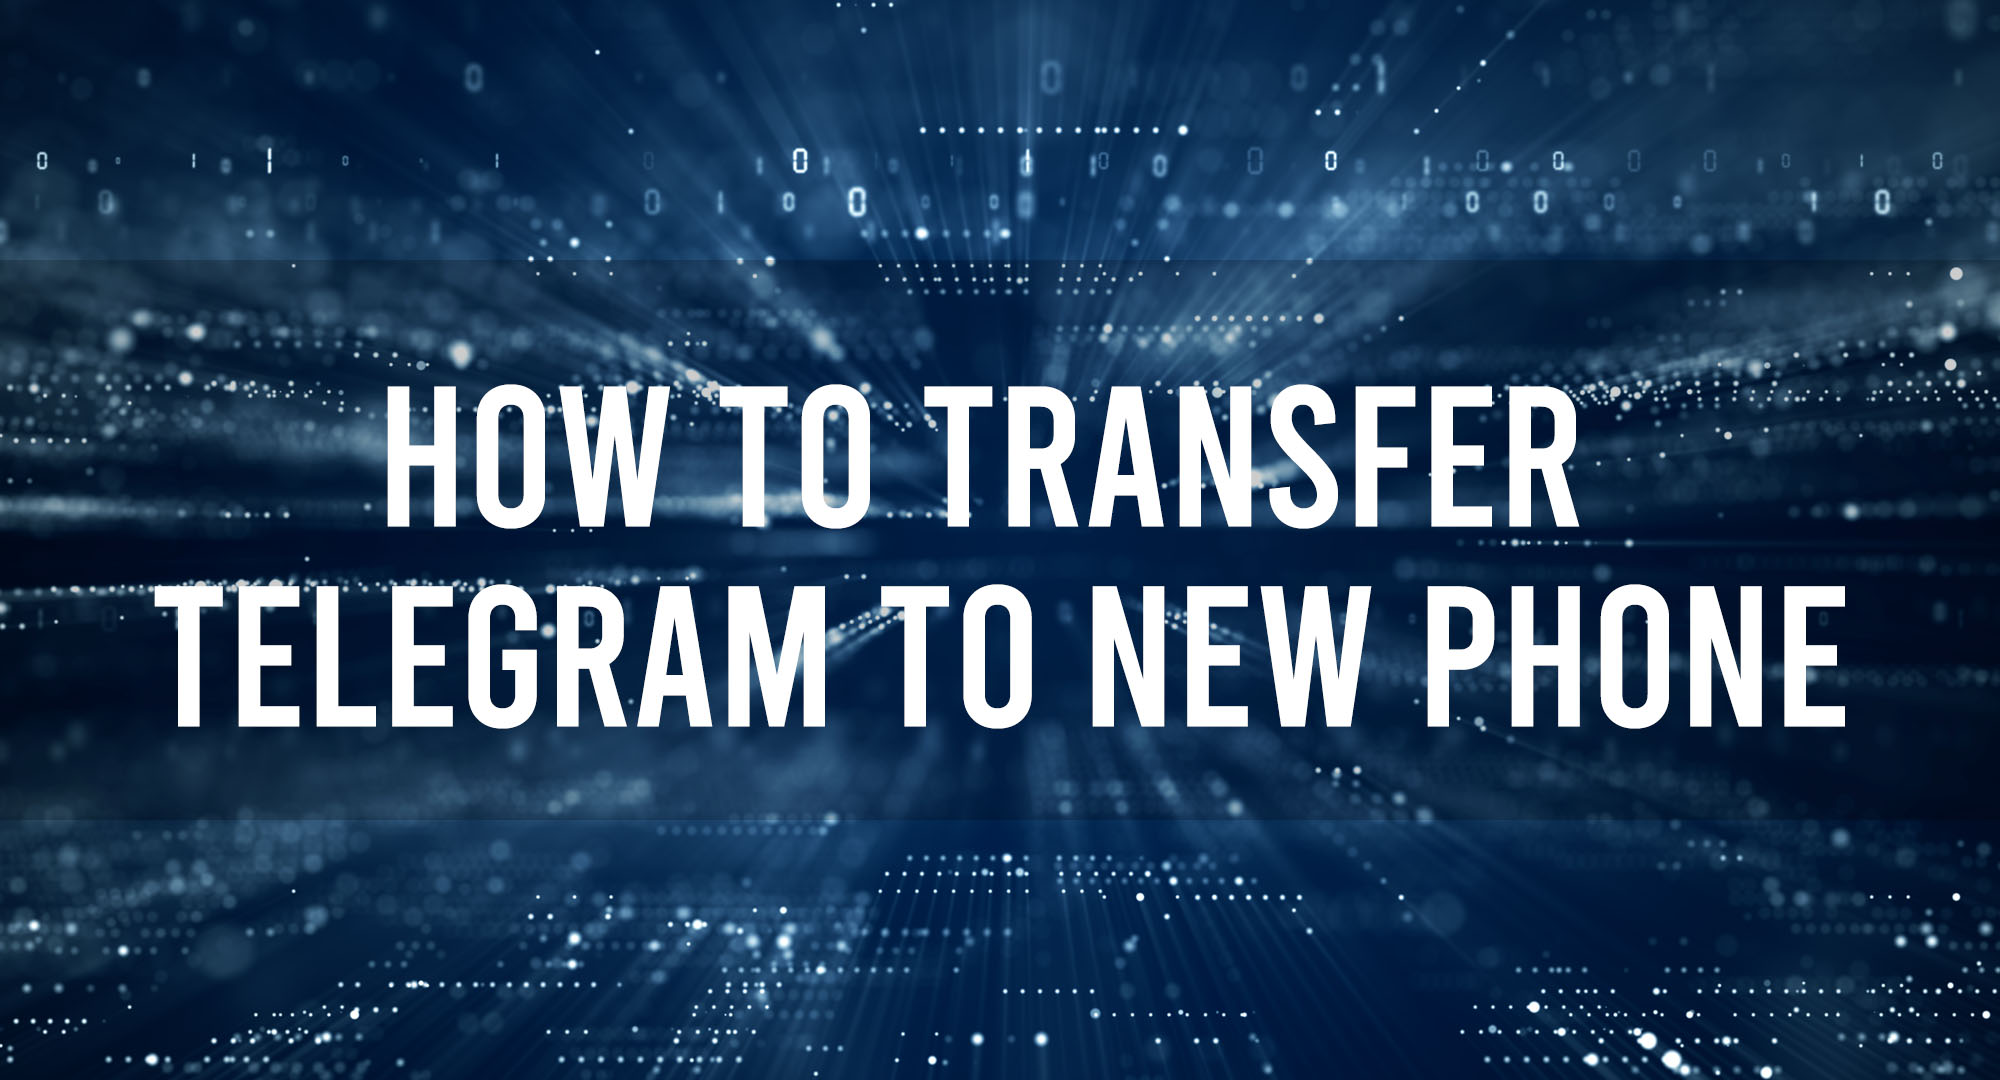 How to transfer telegram to new phone